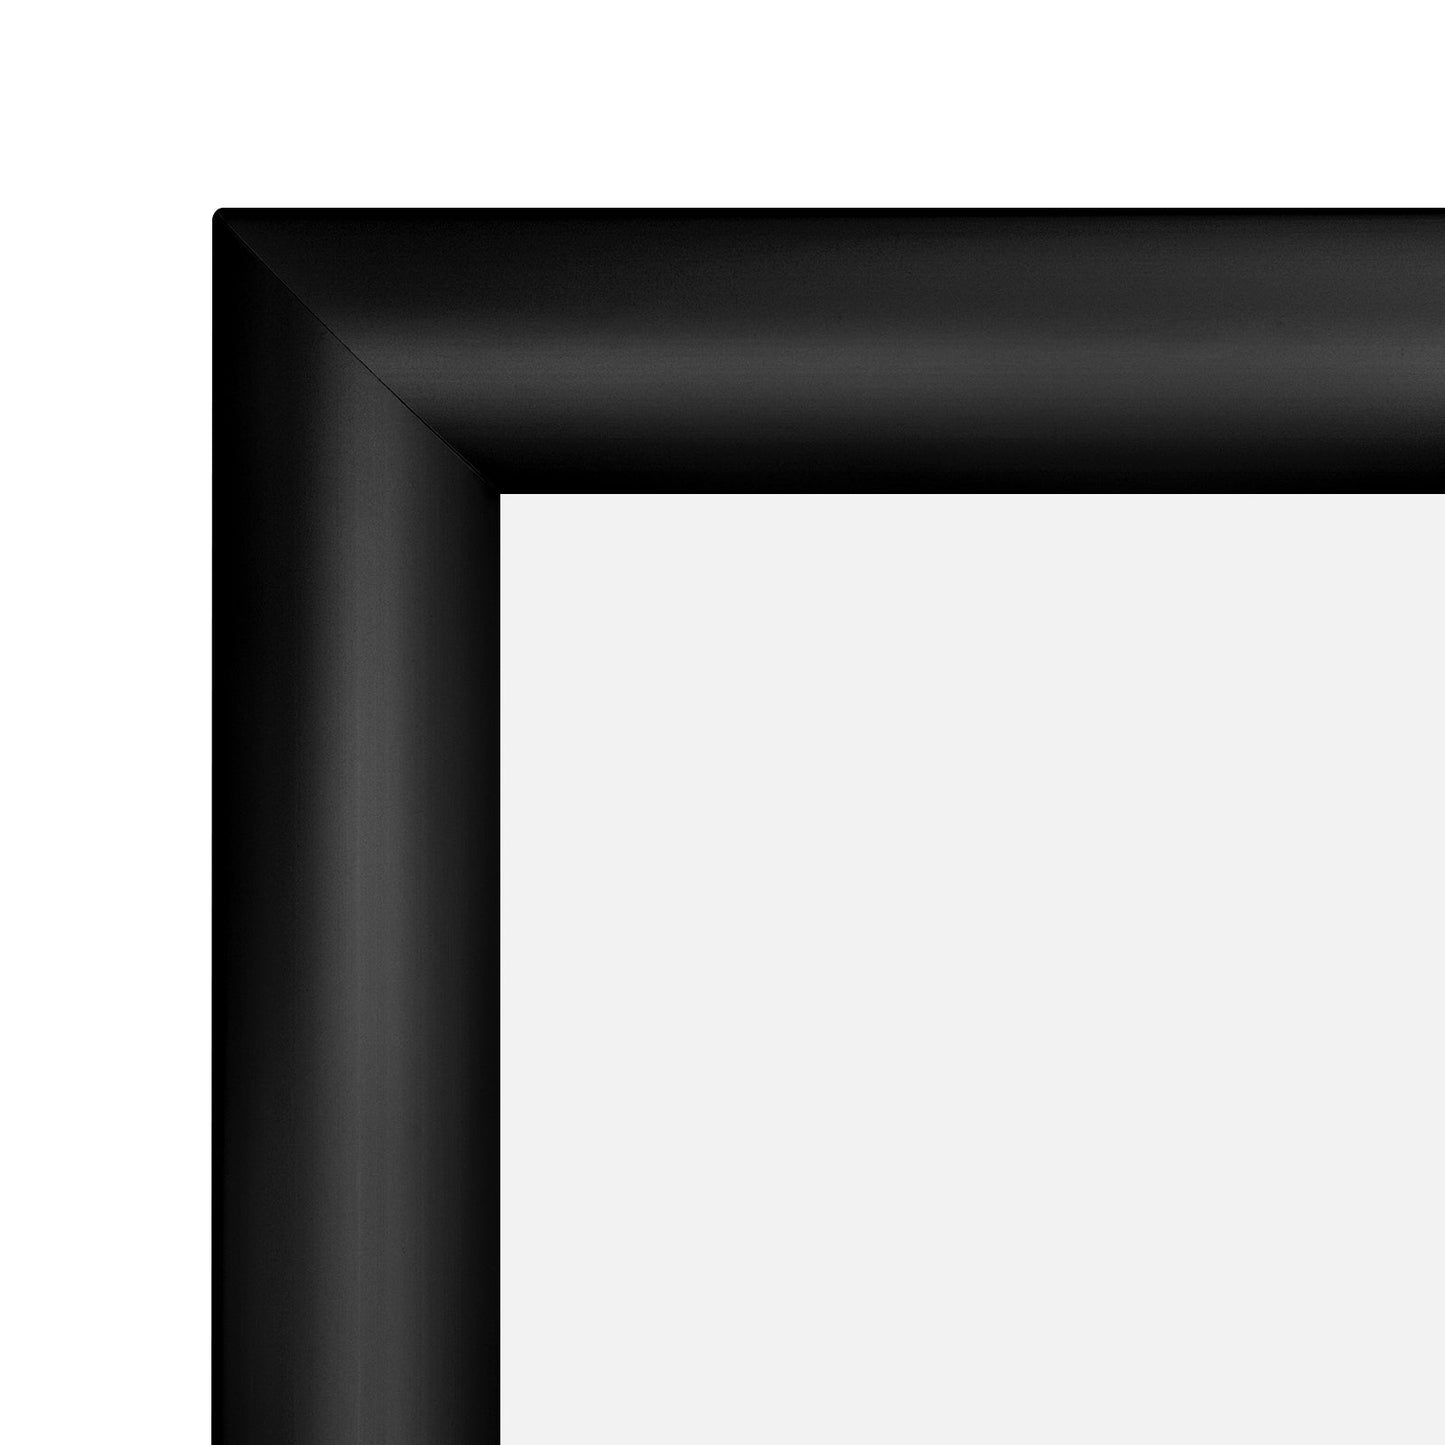 Load image into Gallery viewer, 15x24 Black SnapeZo® Snap Frame - 1.2&amp;quot; Profile
